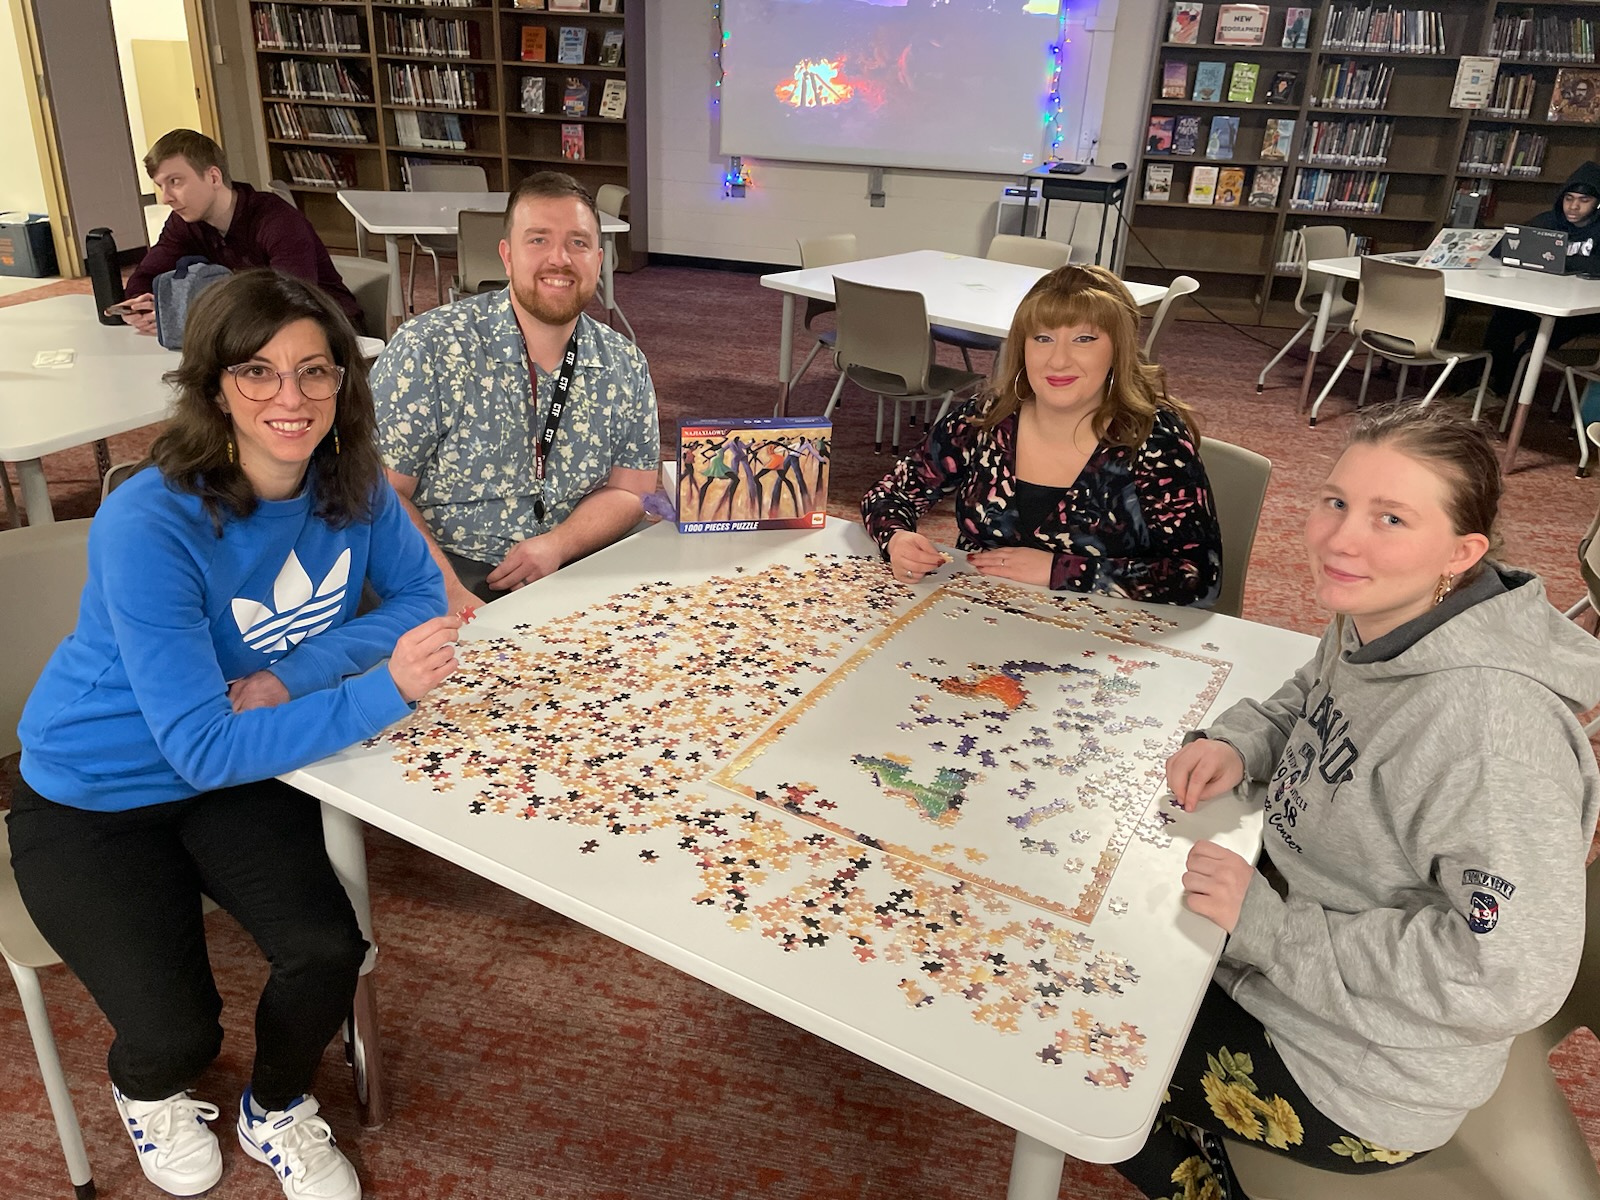 This is a photo of three staff members and a student sitting around a table with a puzzle on the top and smiling at the camera.